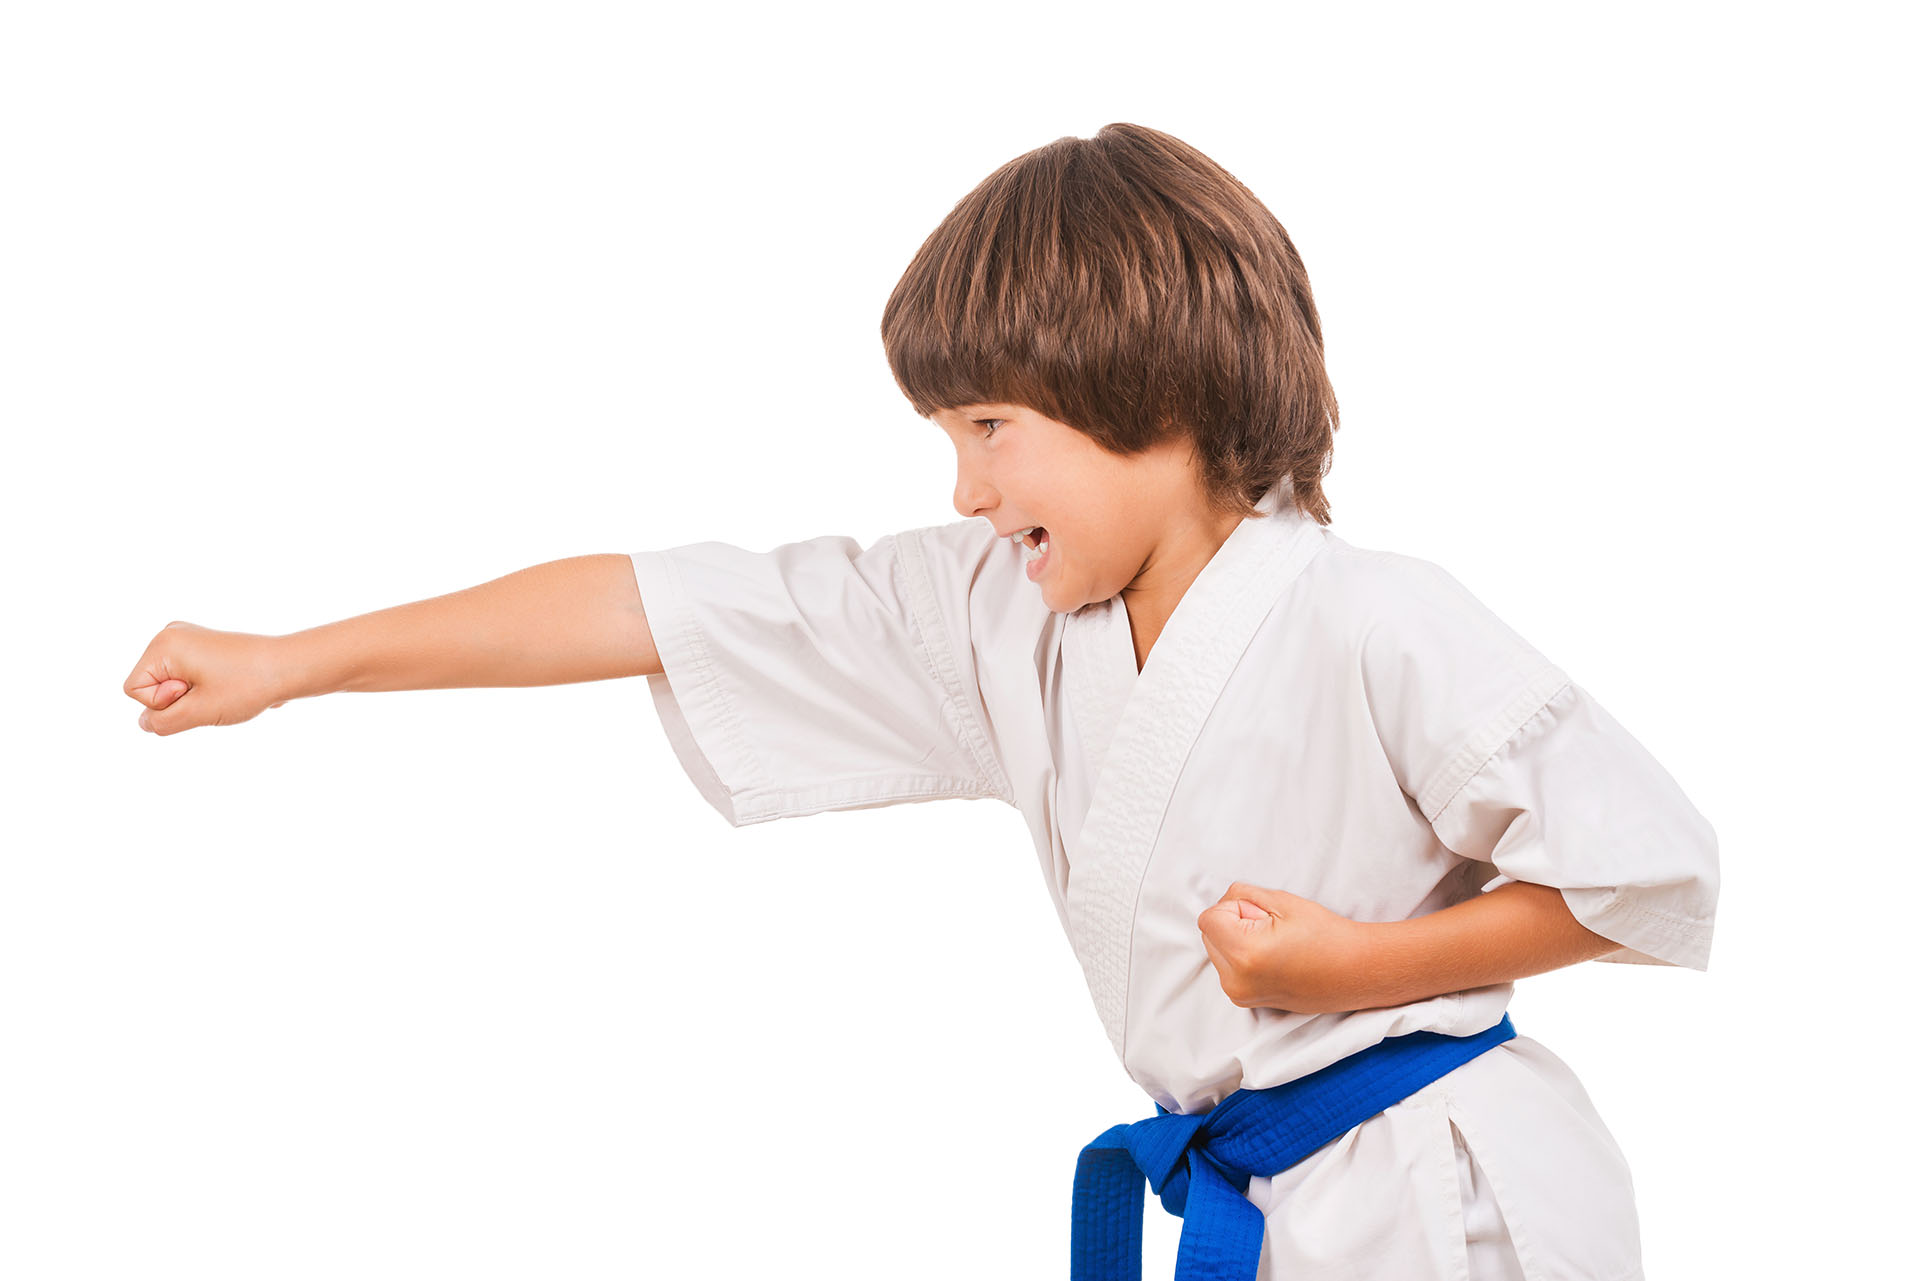 Karate kid. Side view of little boy doing martial arts moves while isolated on white background